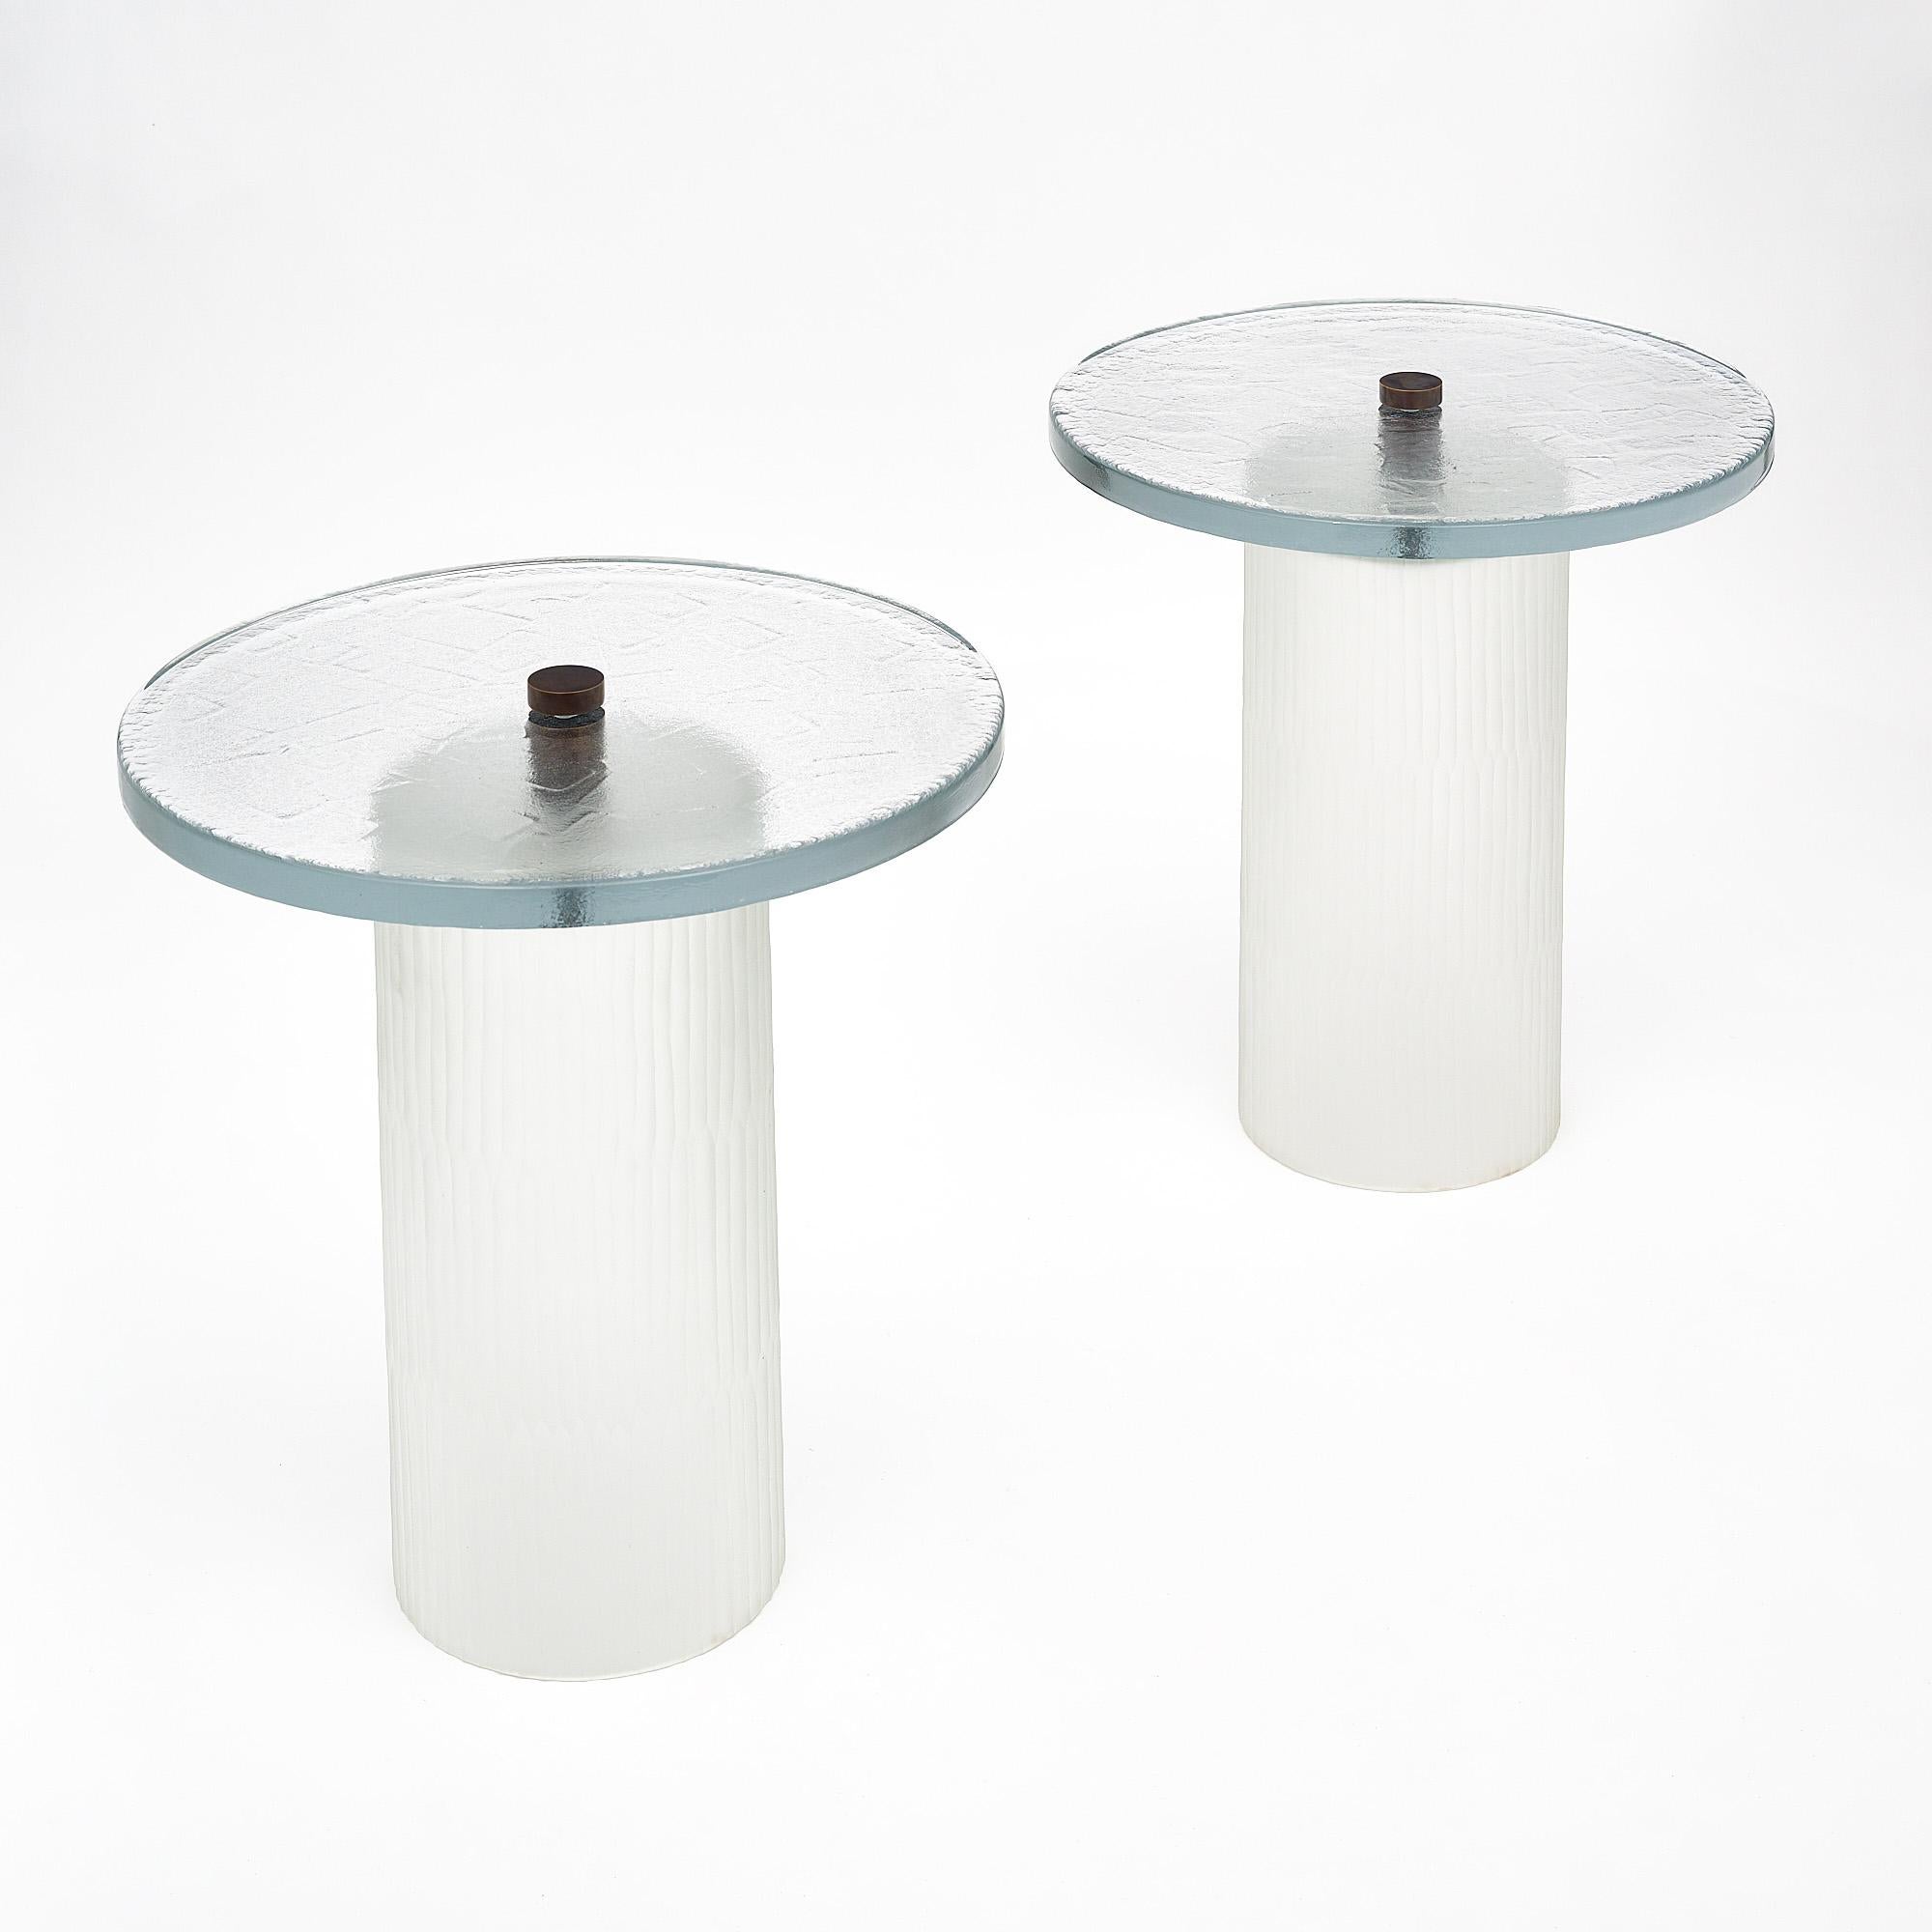 Pair of Murano glass tables, made of thick clear textured and molded glass. The top is connected to the base with a solid brass finial. The diameter of the base is 10”.